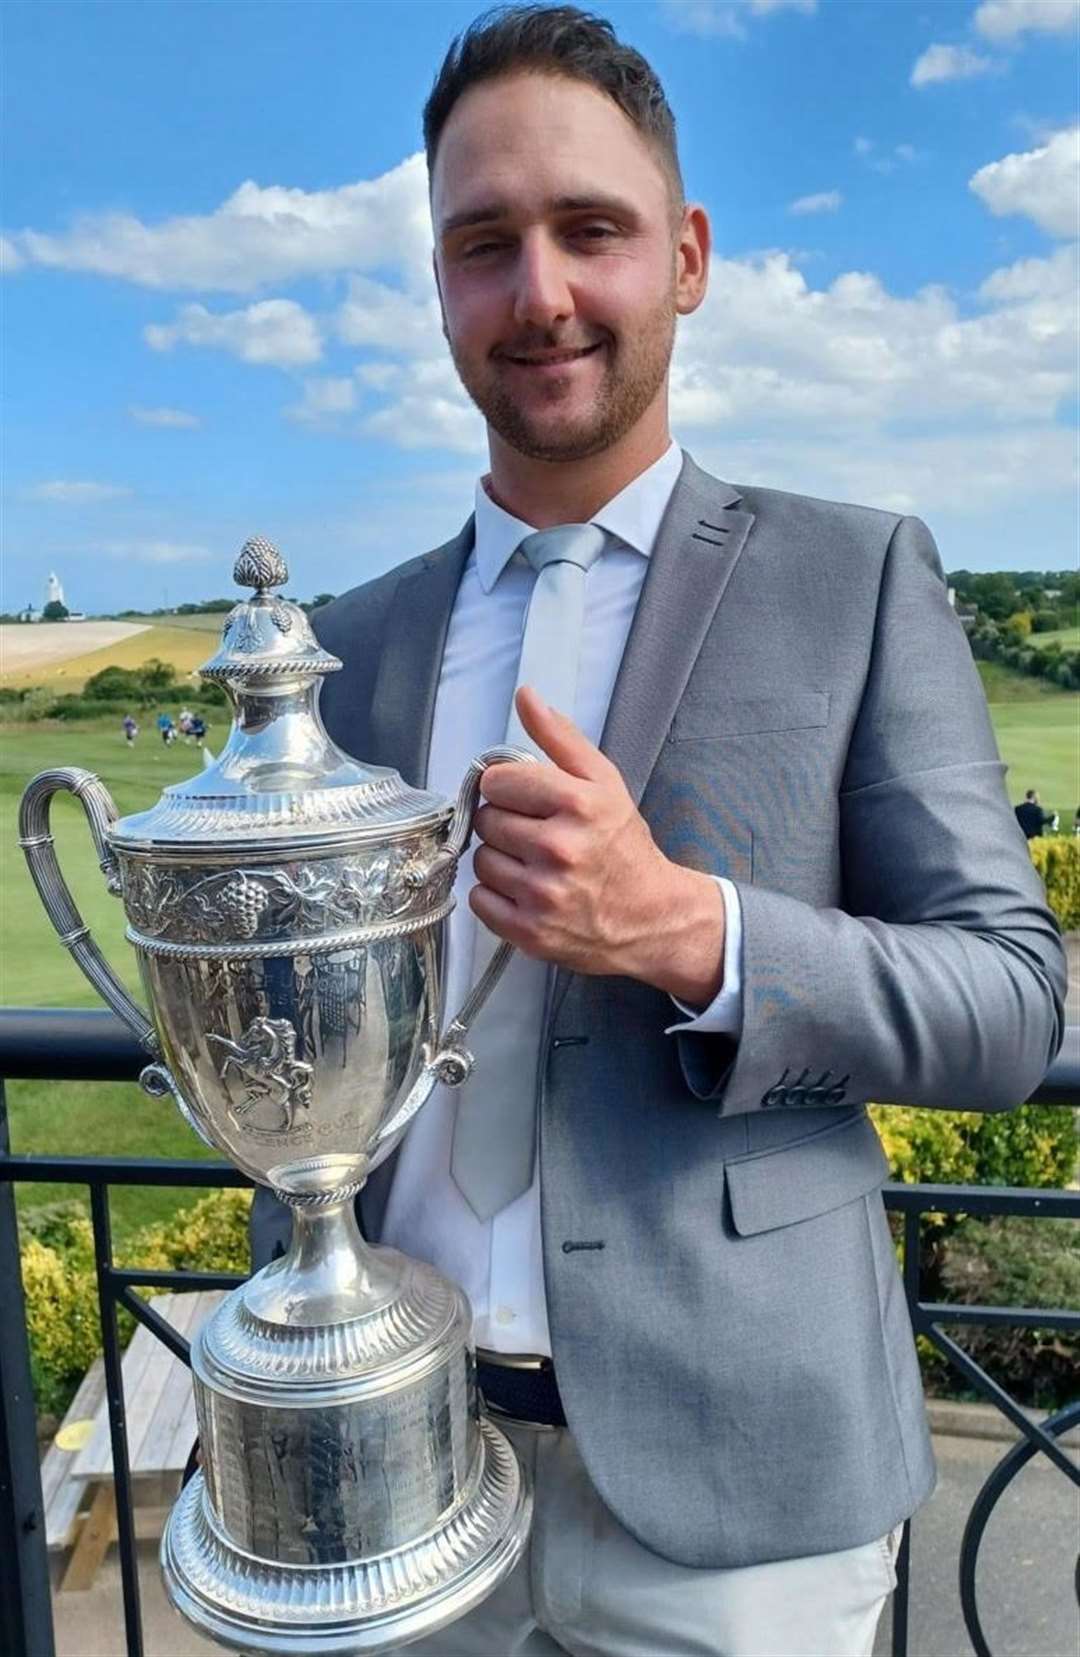 Canterbury Golf Club's Dan Cooke with the Invicta Challenge Cup